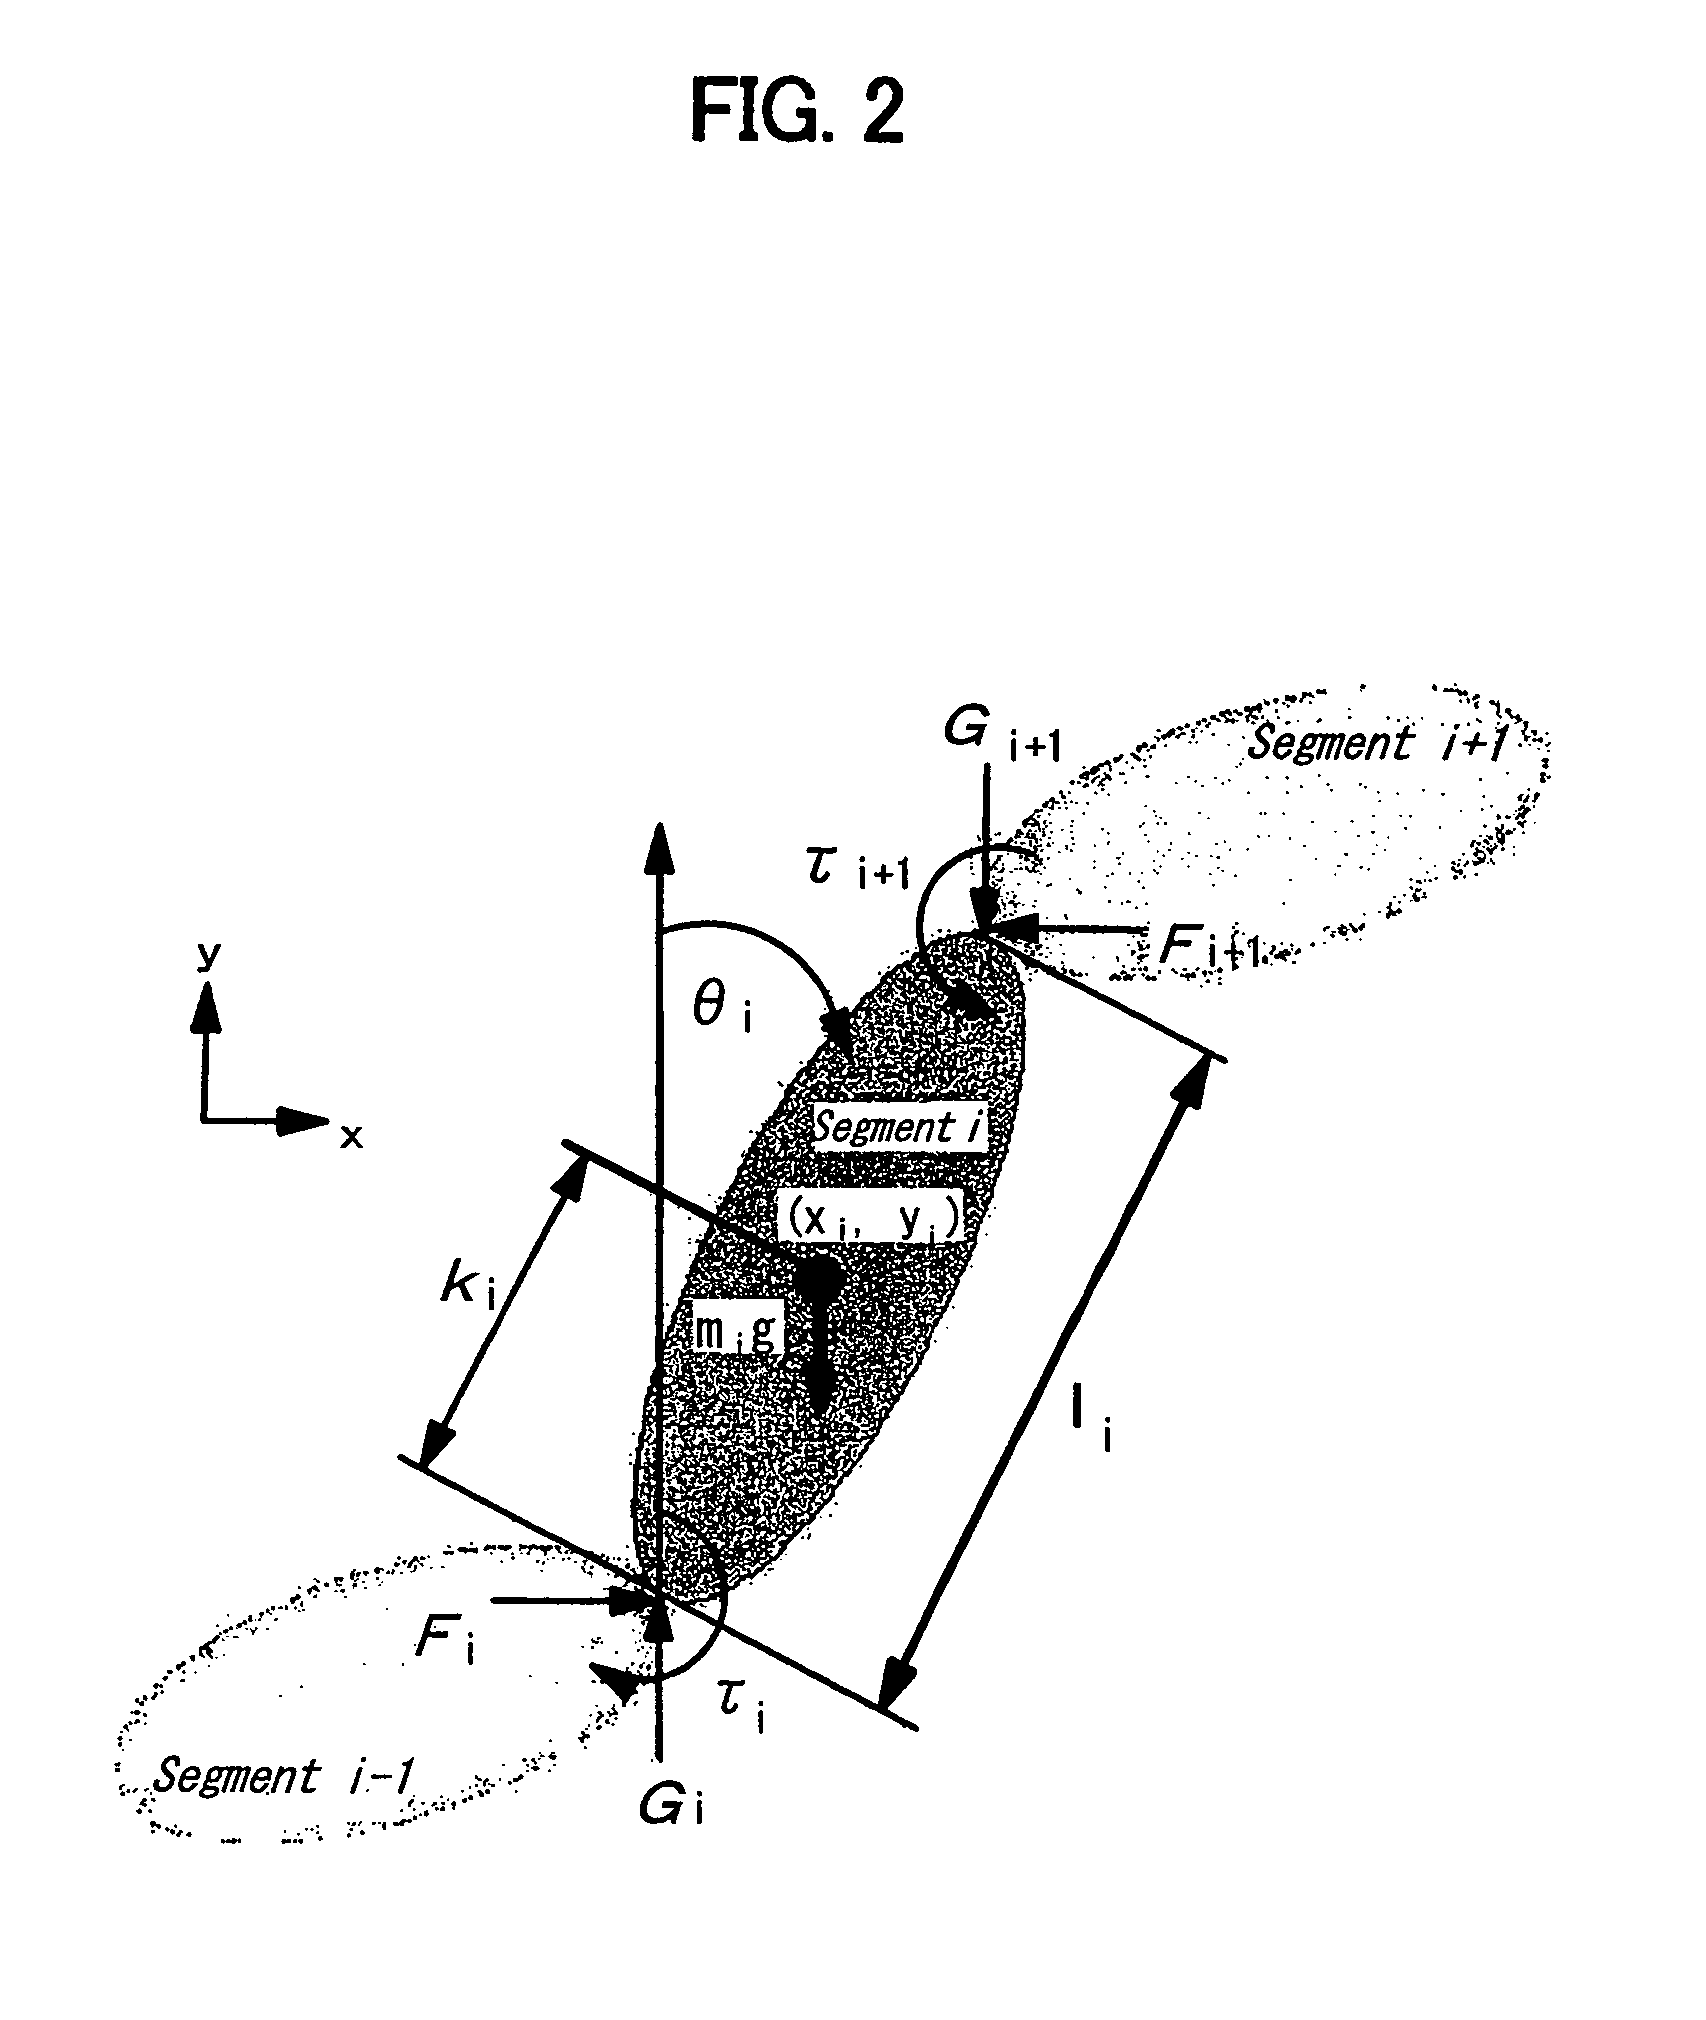 Human assist system using gravity compensation control system and method using multiple feasibility parameters